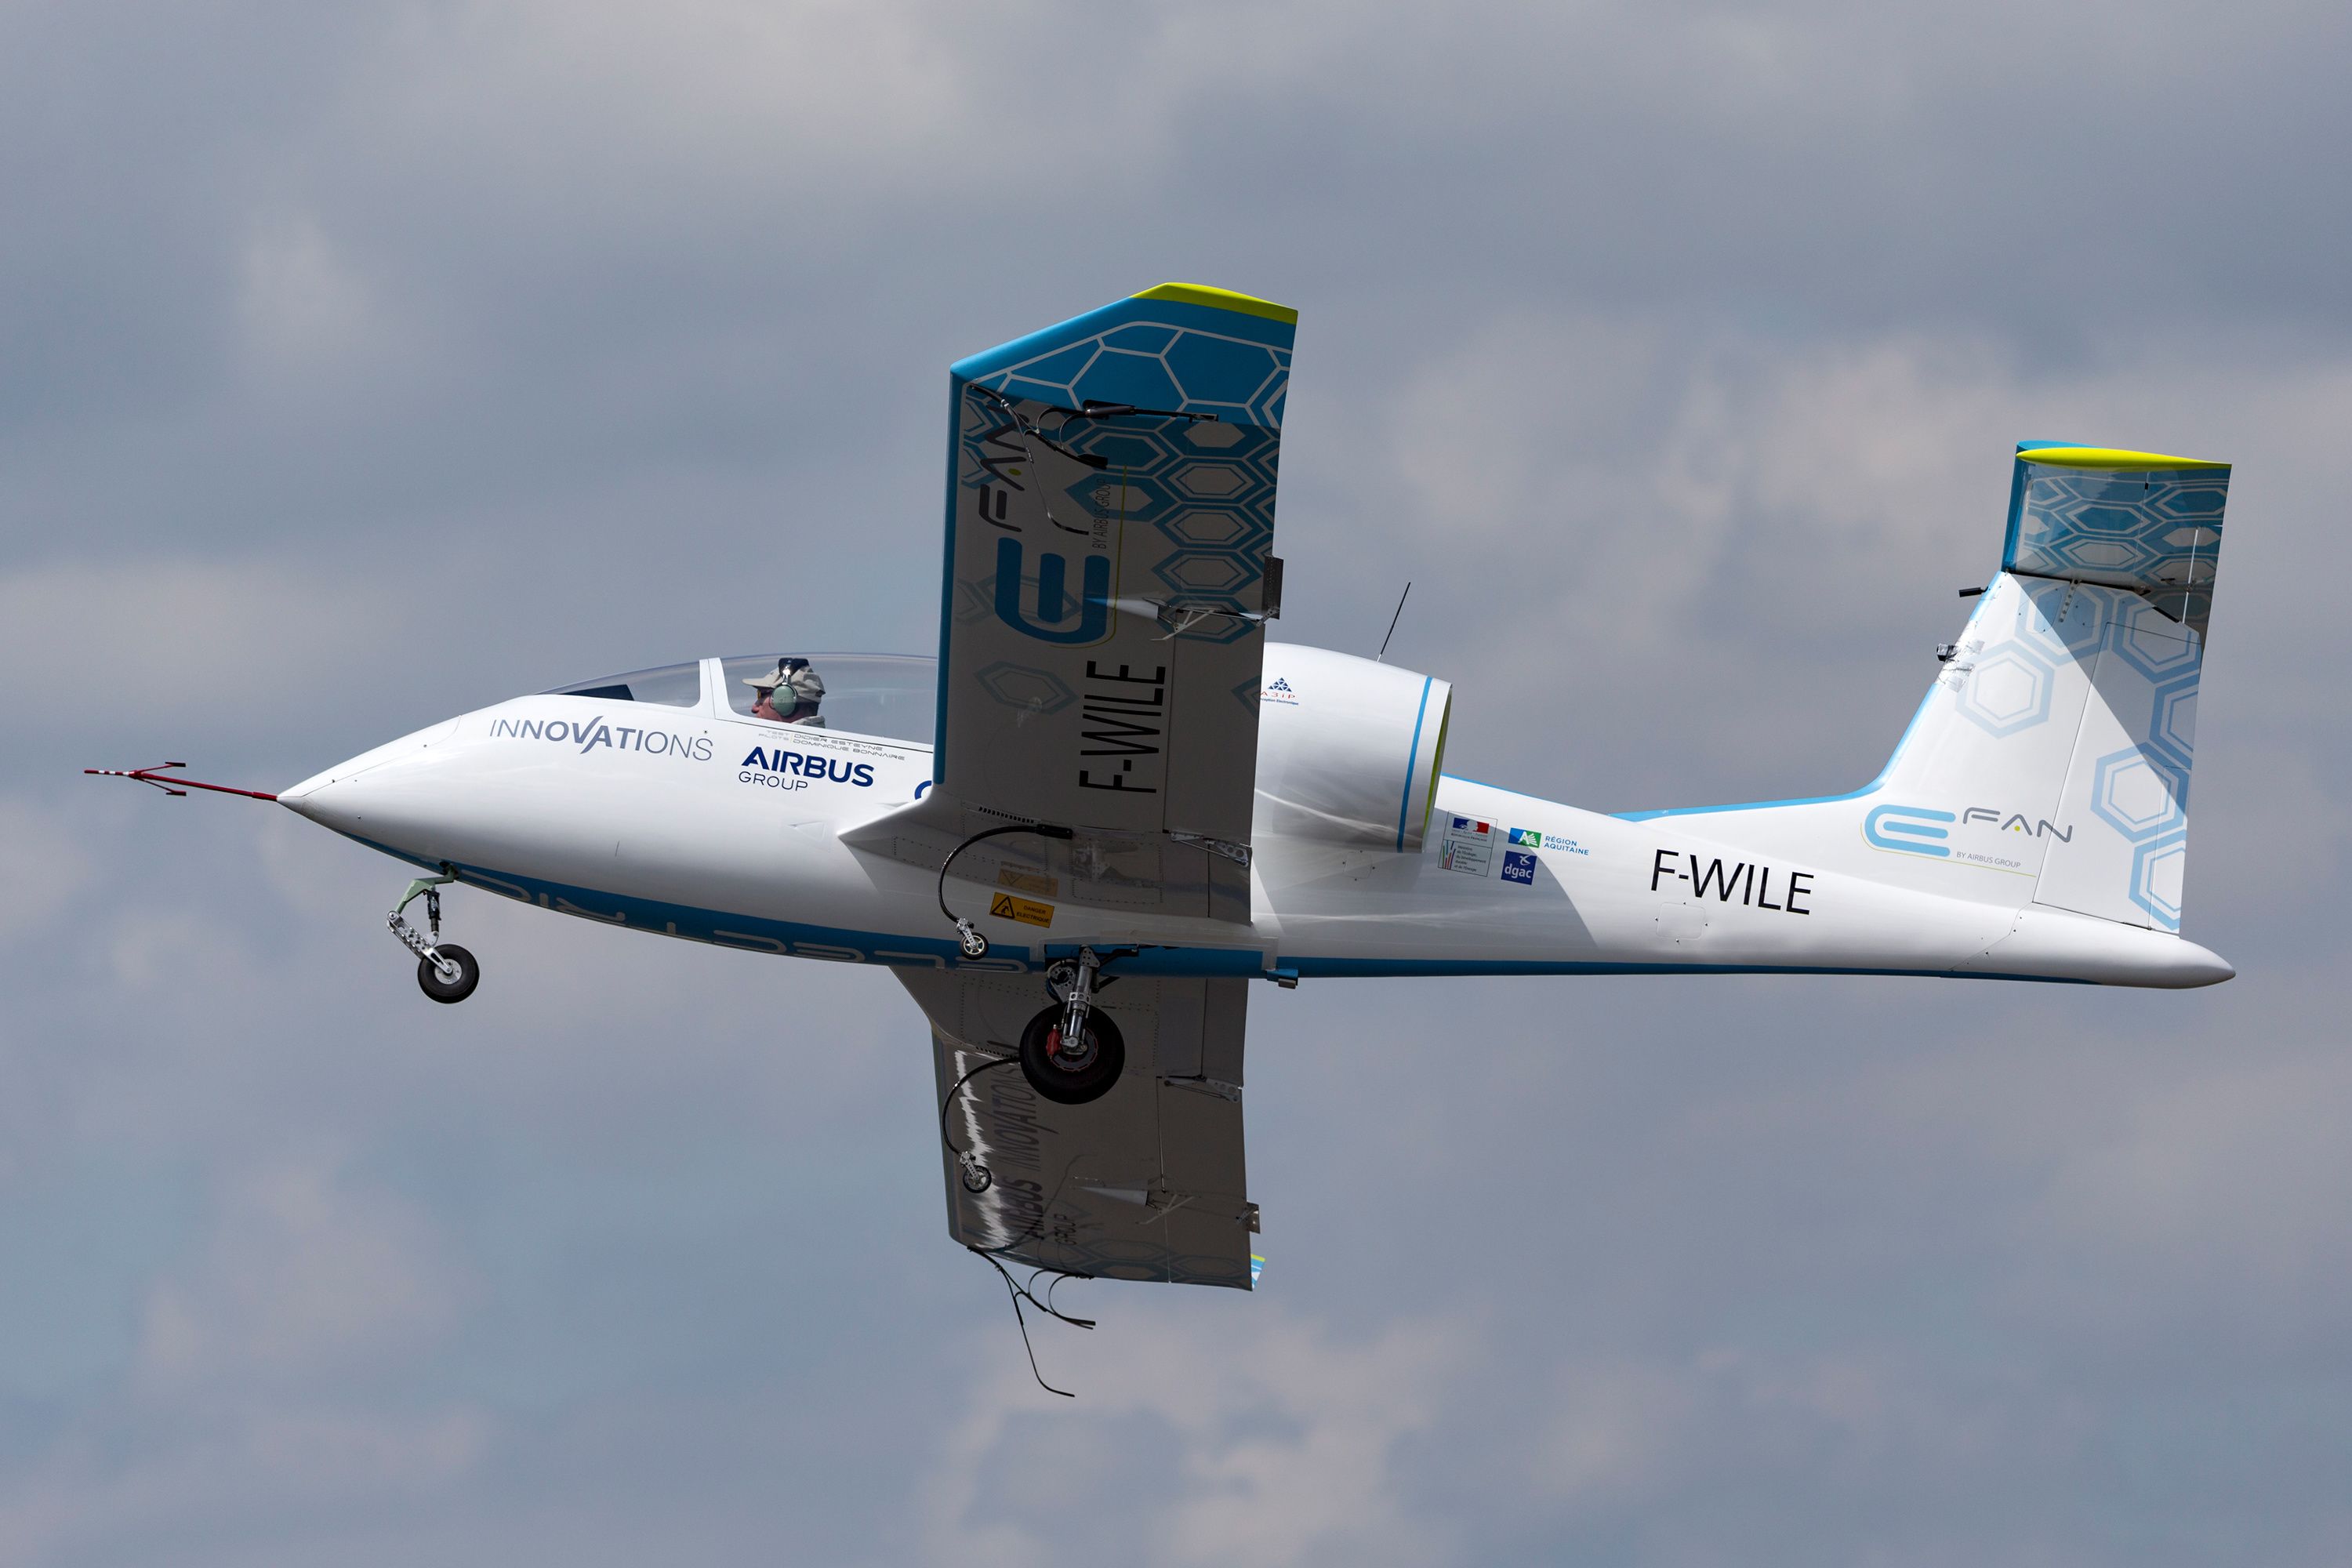 A shot of a small single passenger electric plane flying